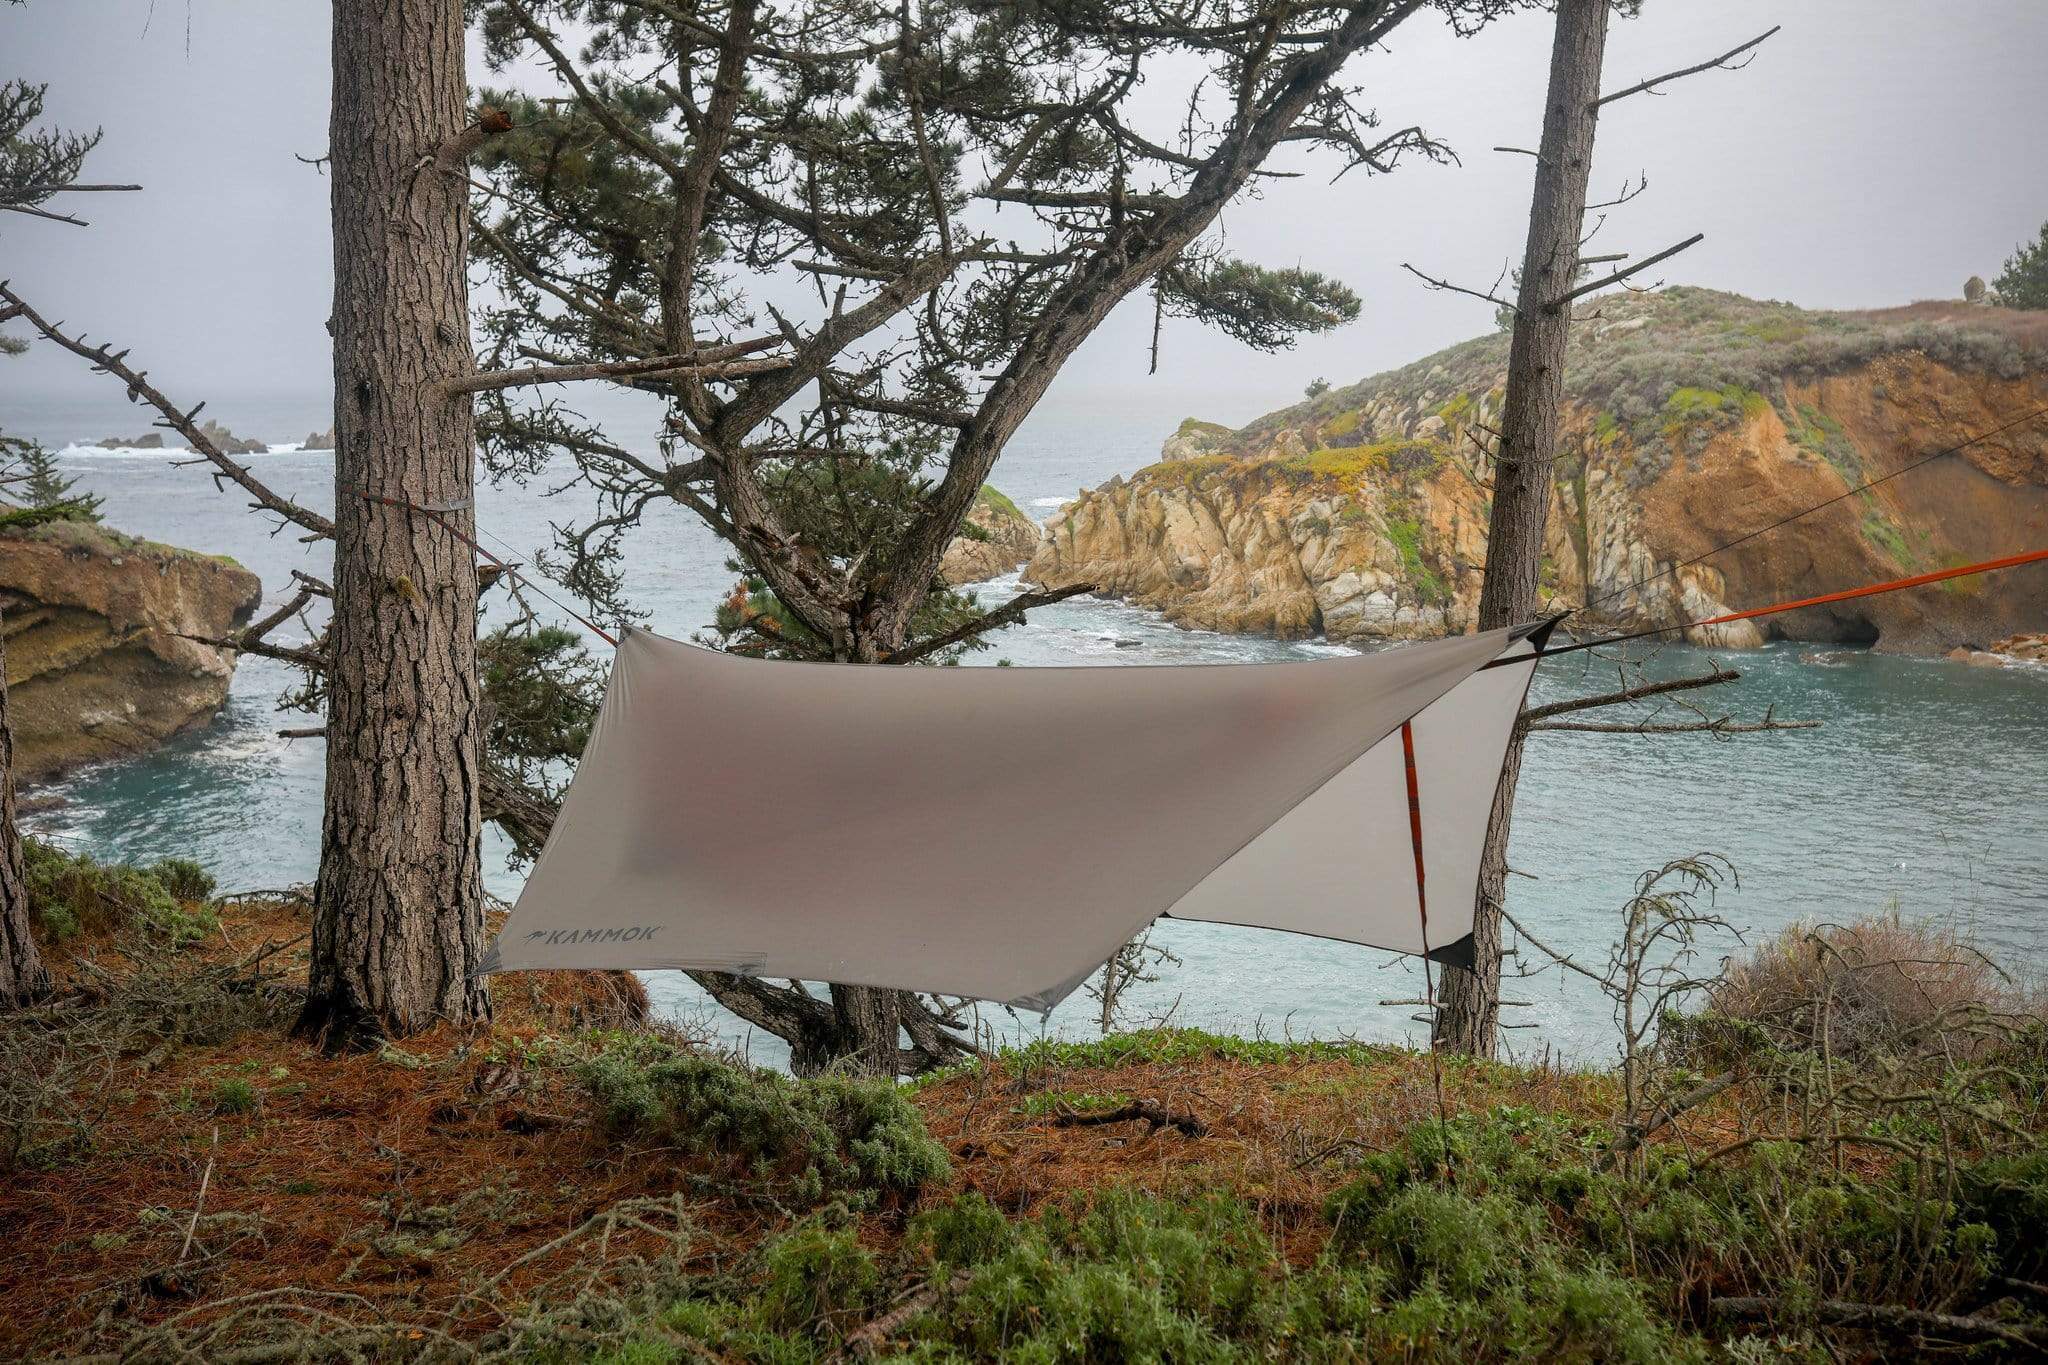 LINK NORTH - Versatile puffy blanket, insulated hammock etc. by